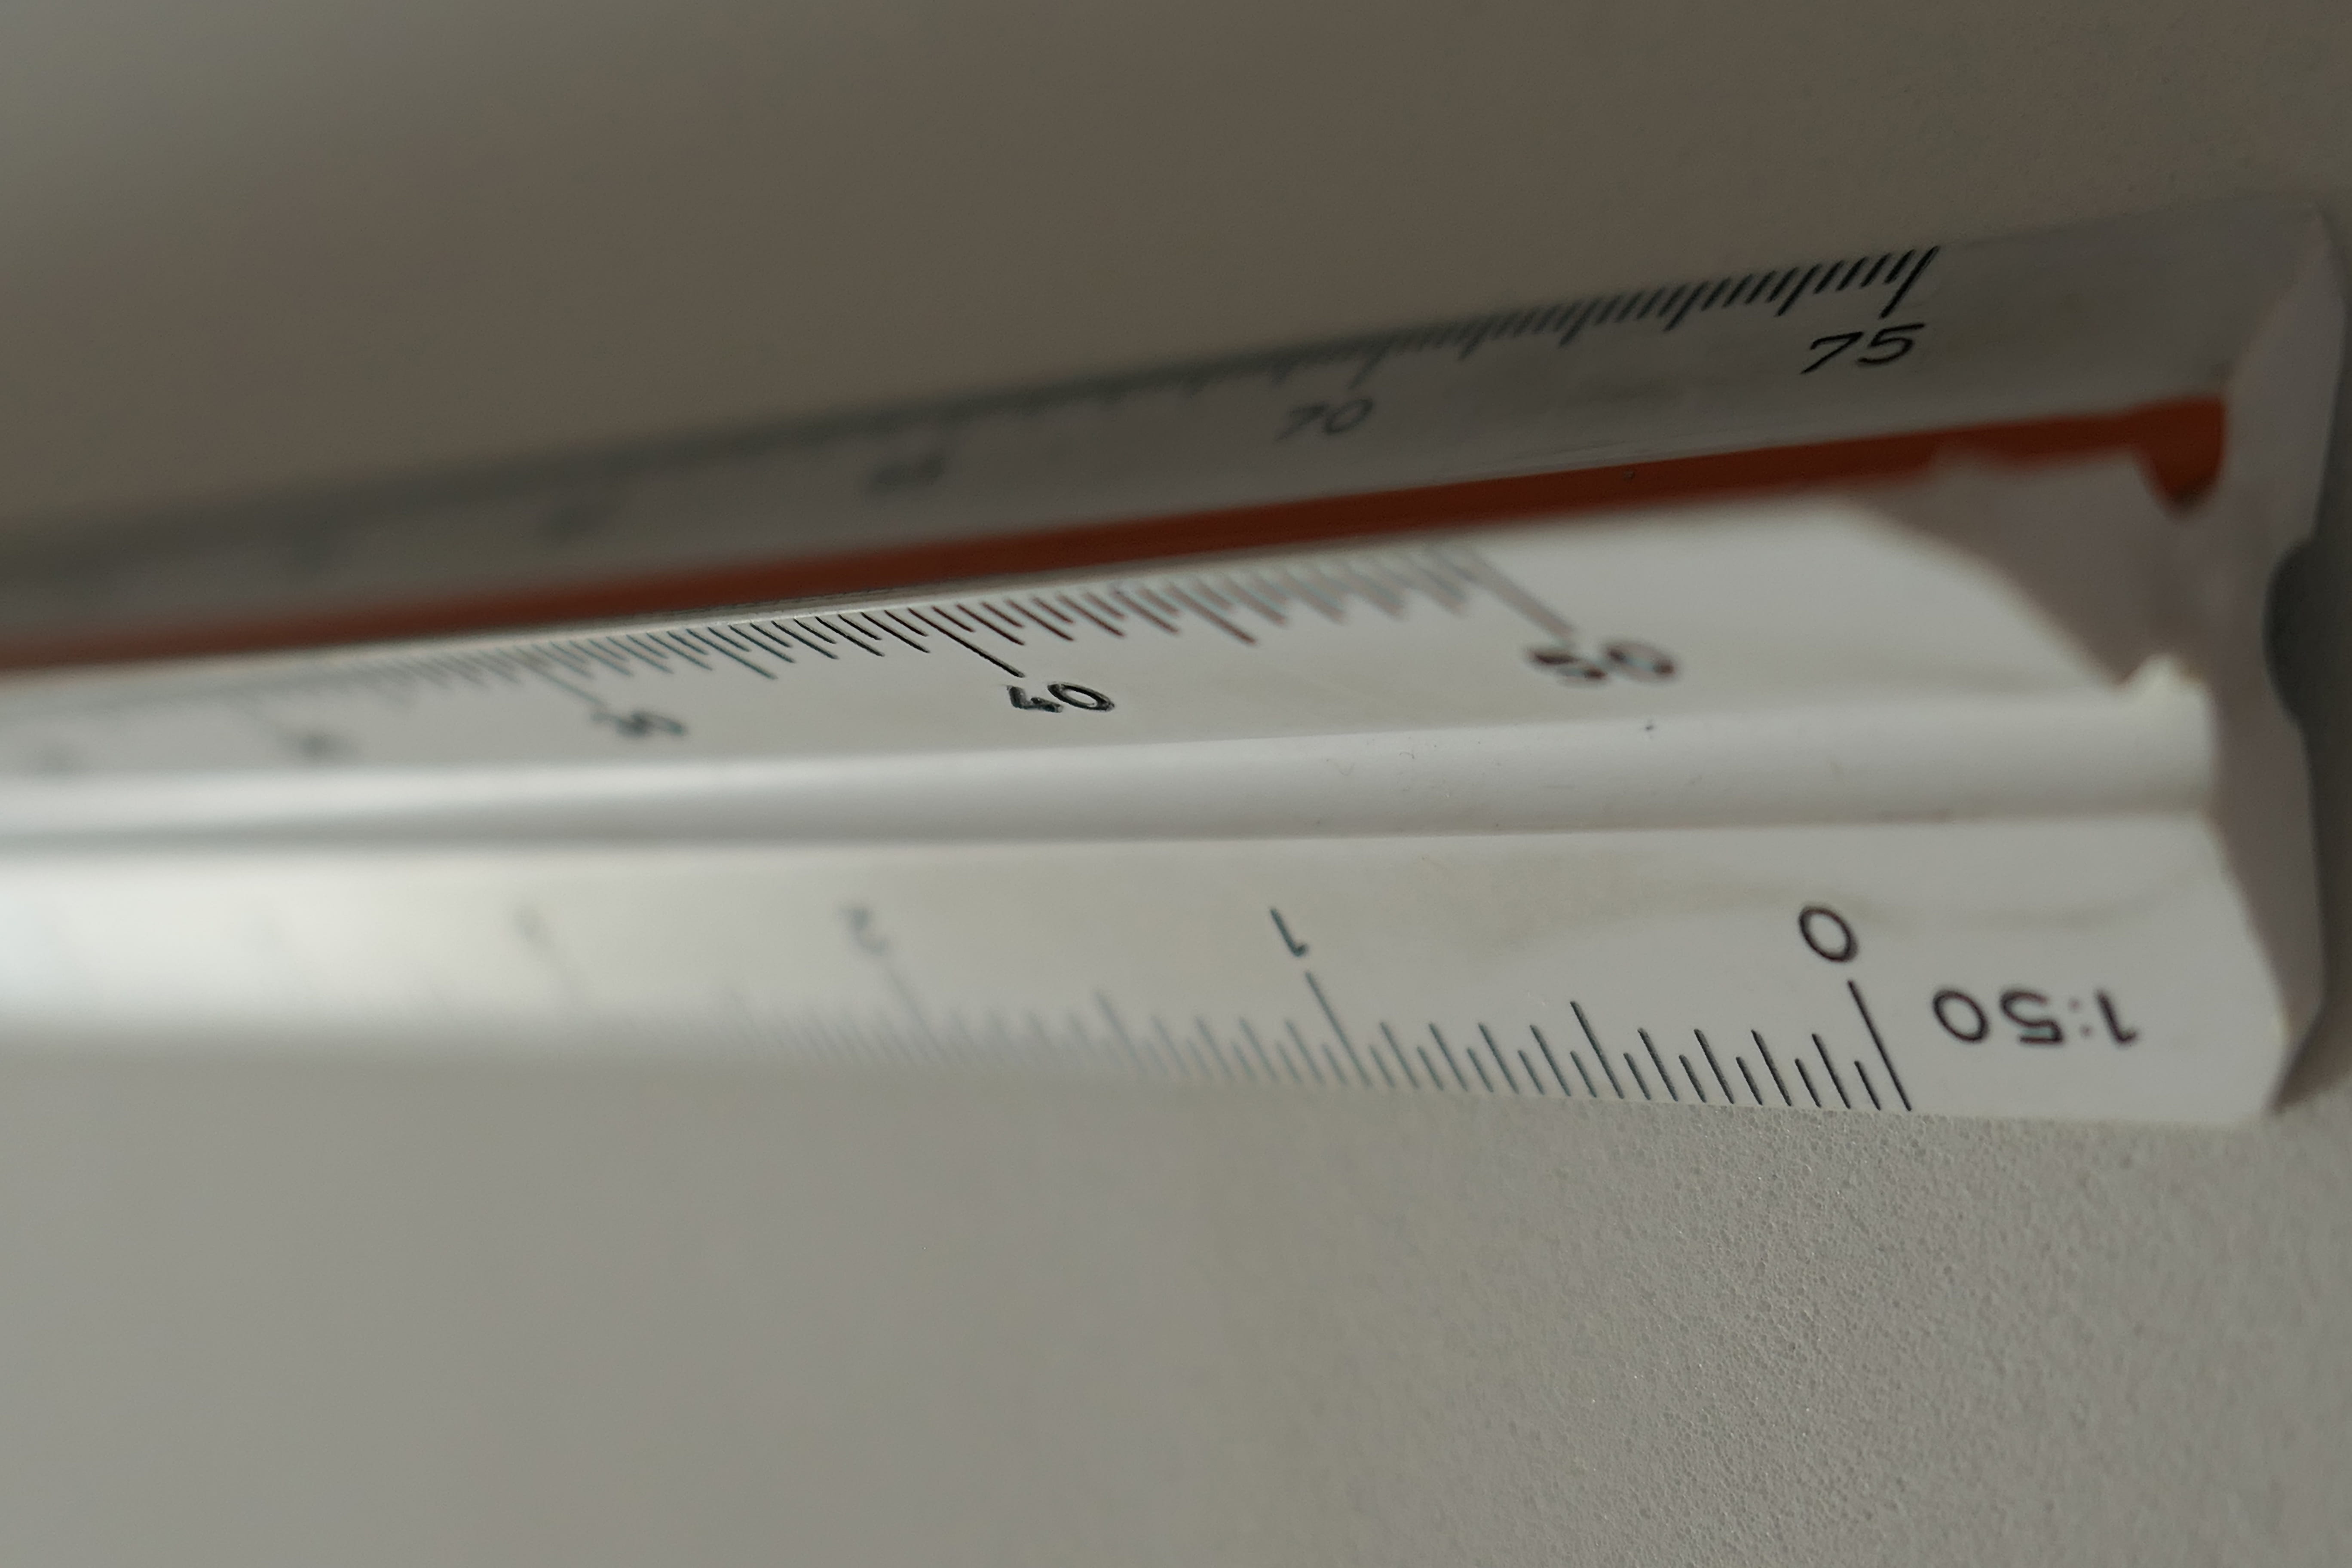 ruler, measure, exactly, centimeters, datailaufnahme, metric